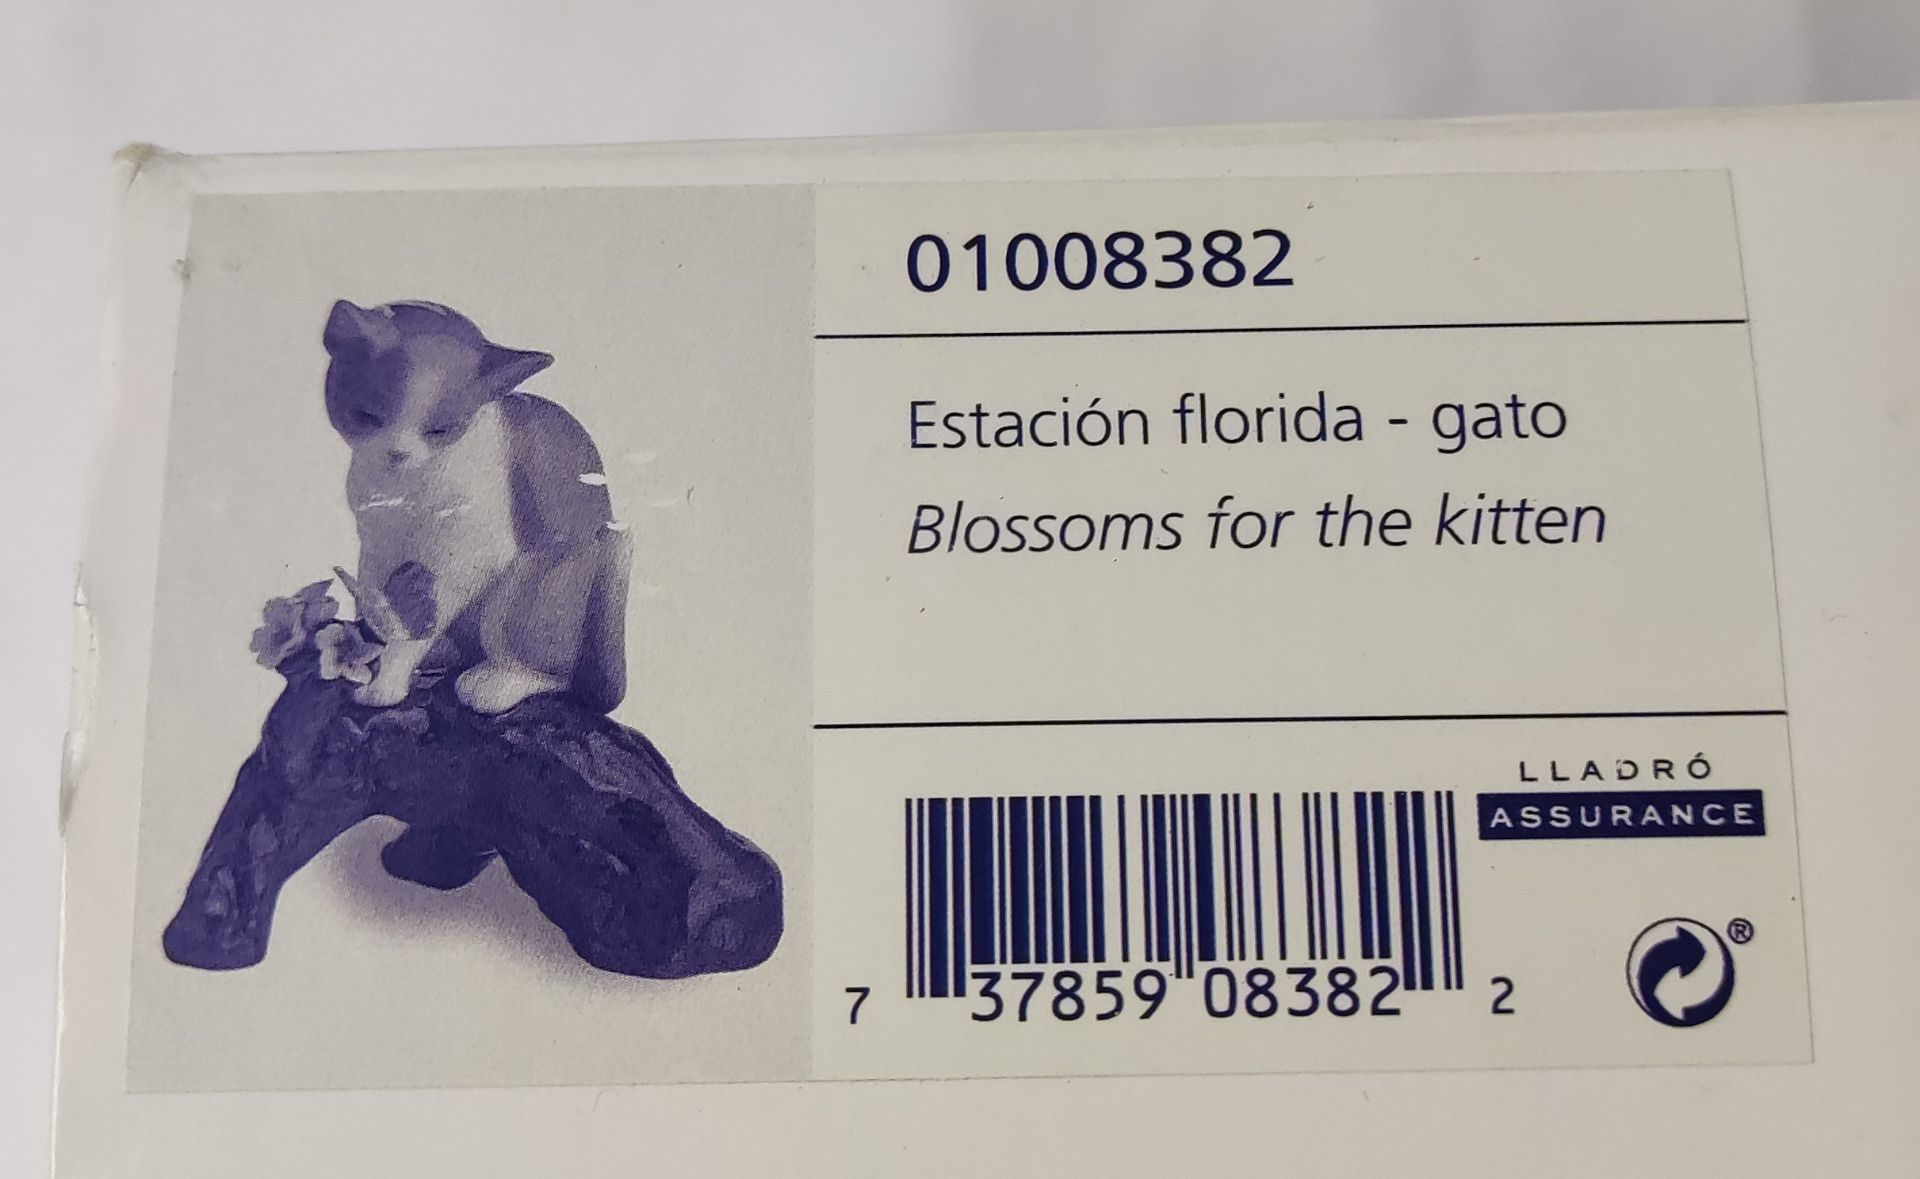 1 x LLADRO Blossoms For The Kitten Cat Porcelain Figurine - New/Boxed - RRP £270 - Ref: /HOC243/ - Image 20 of 21